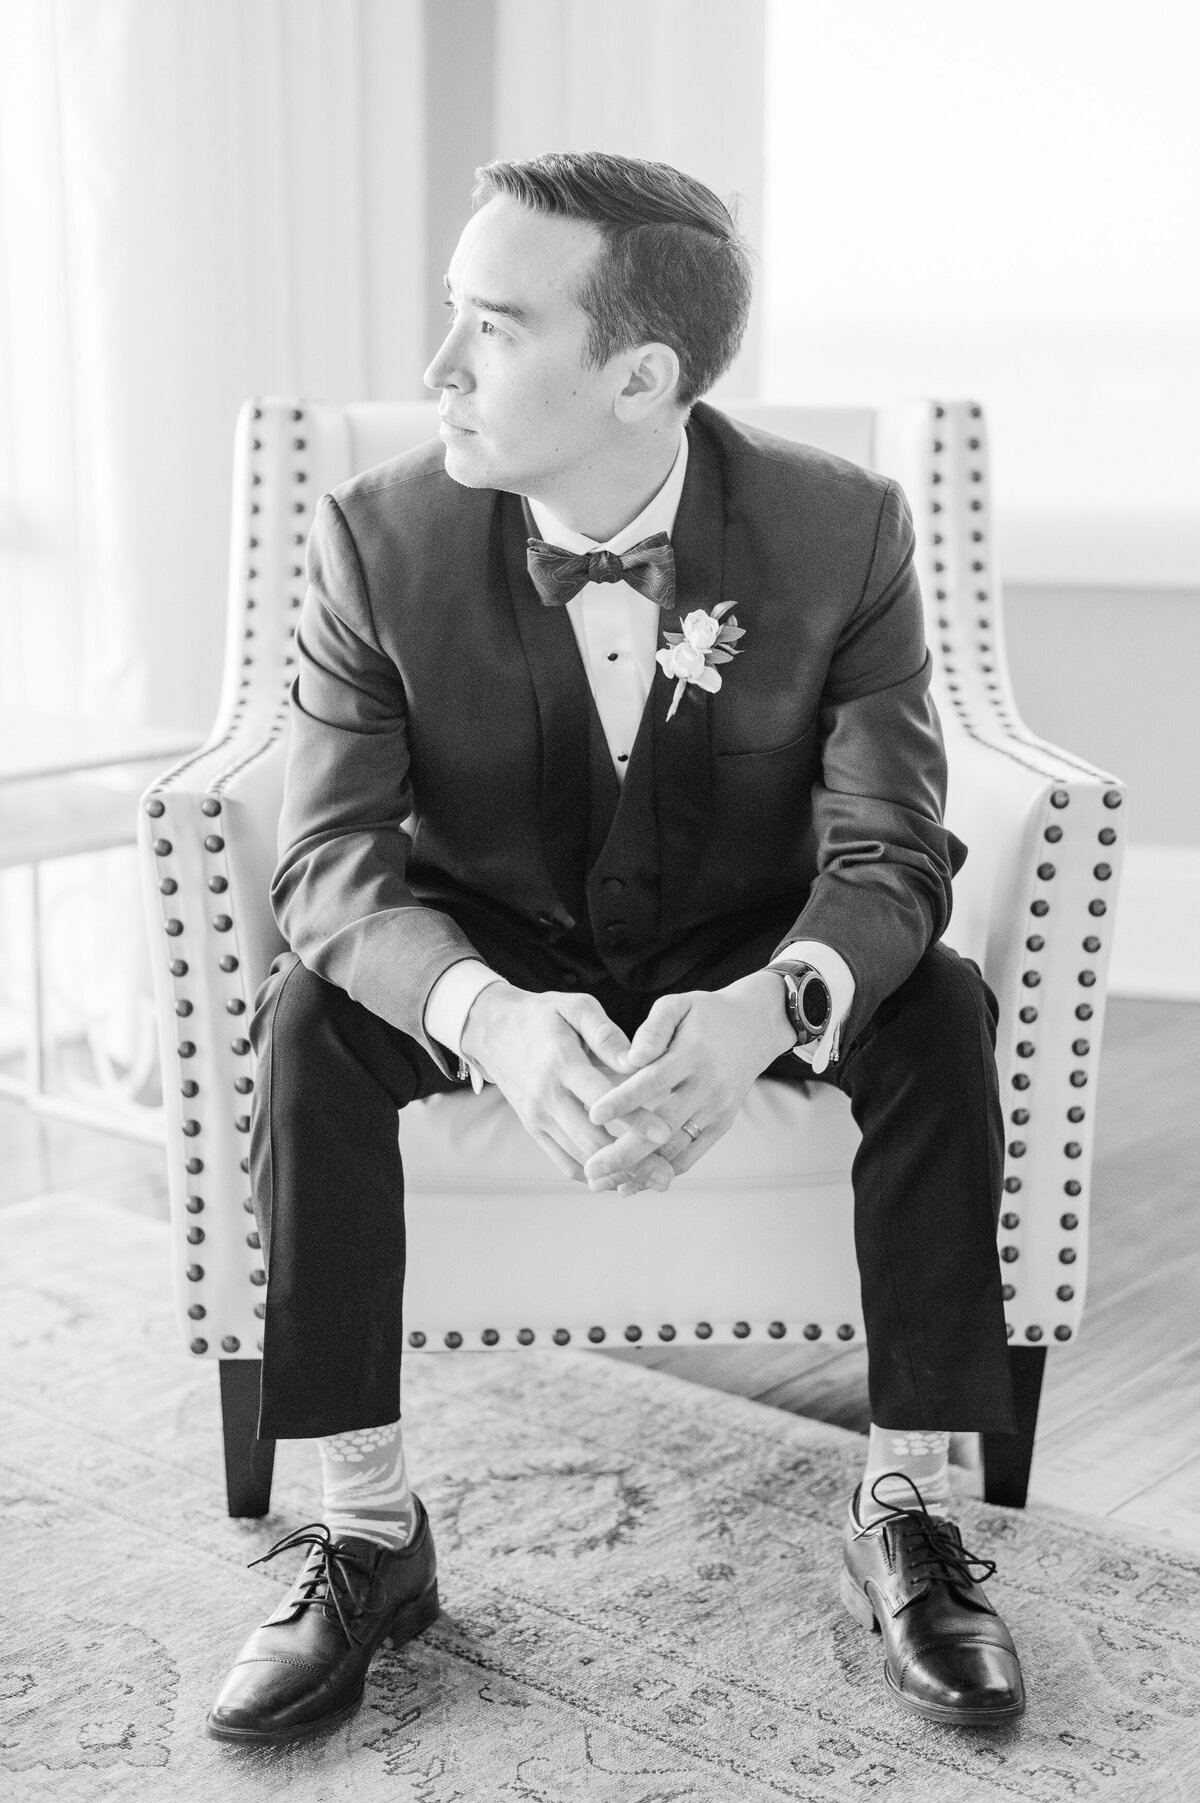 Groom sitting in a chair looking out the window in the bridal suite of the Pinery at the Hill.